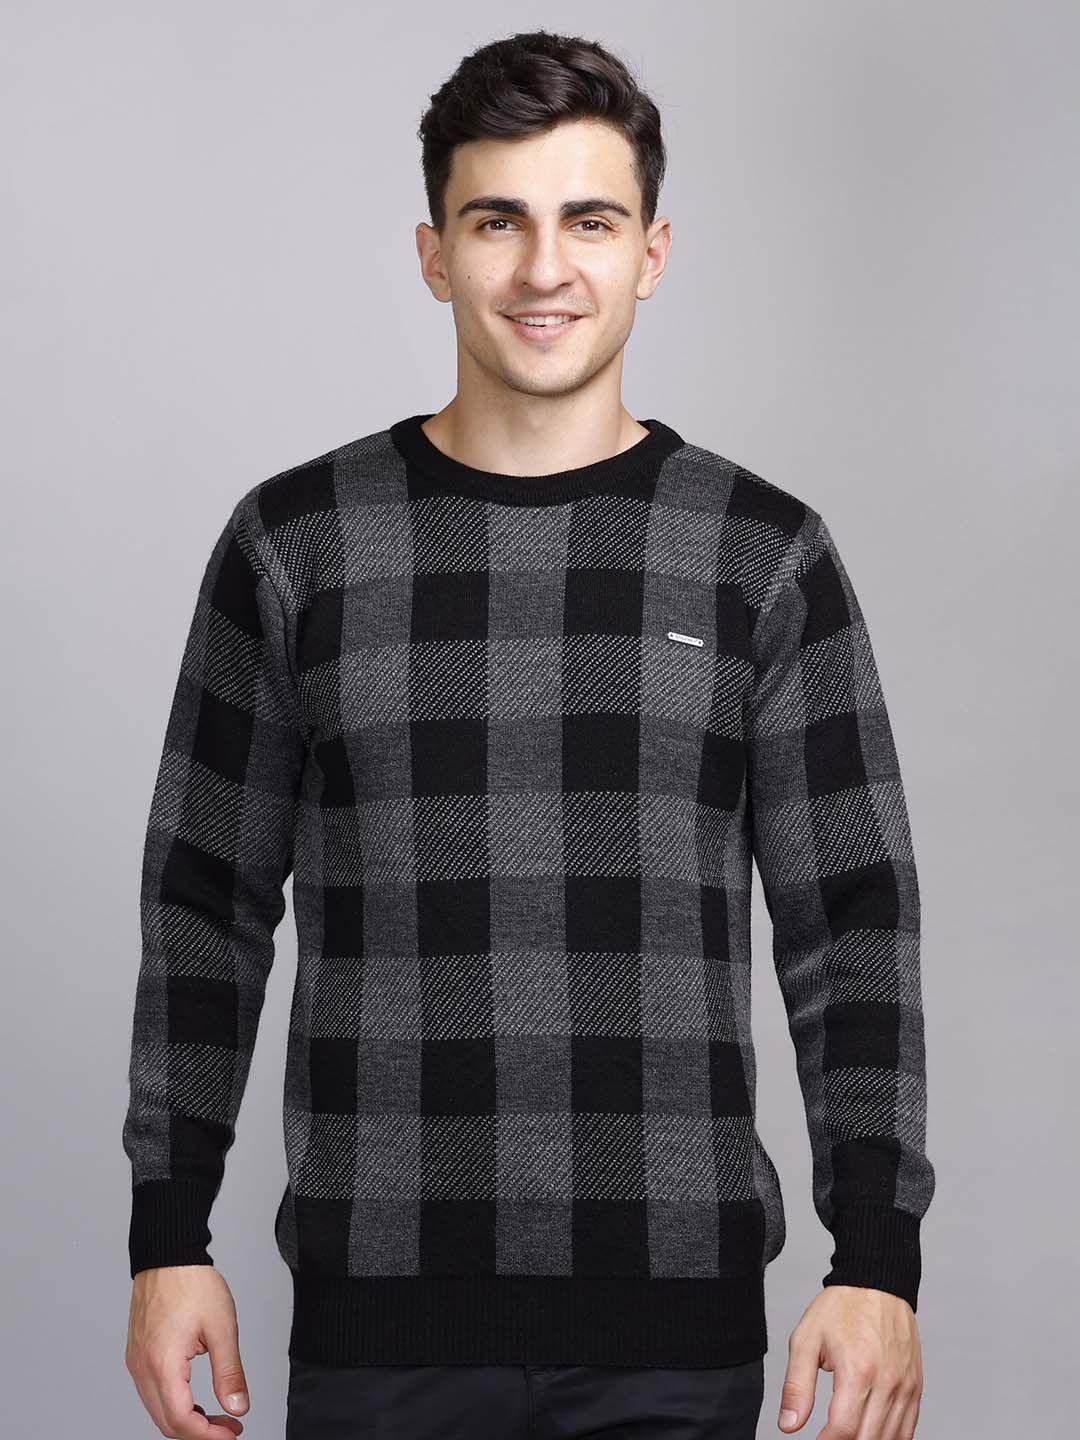 godfrey checked round neck long sleeves acrylic pullover